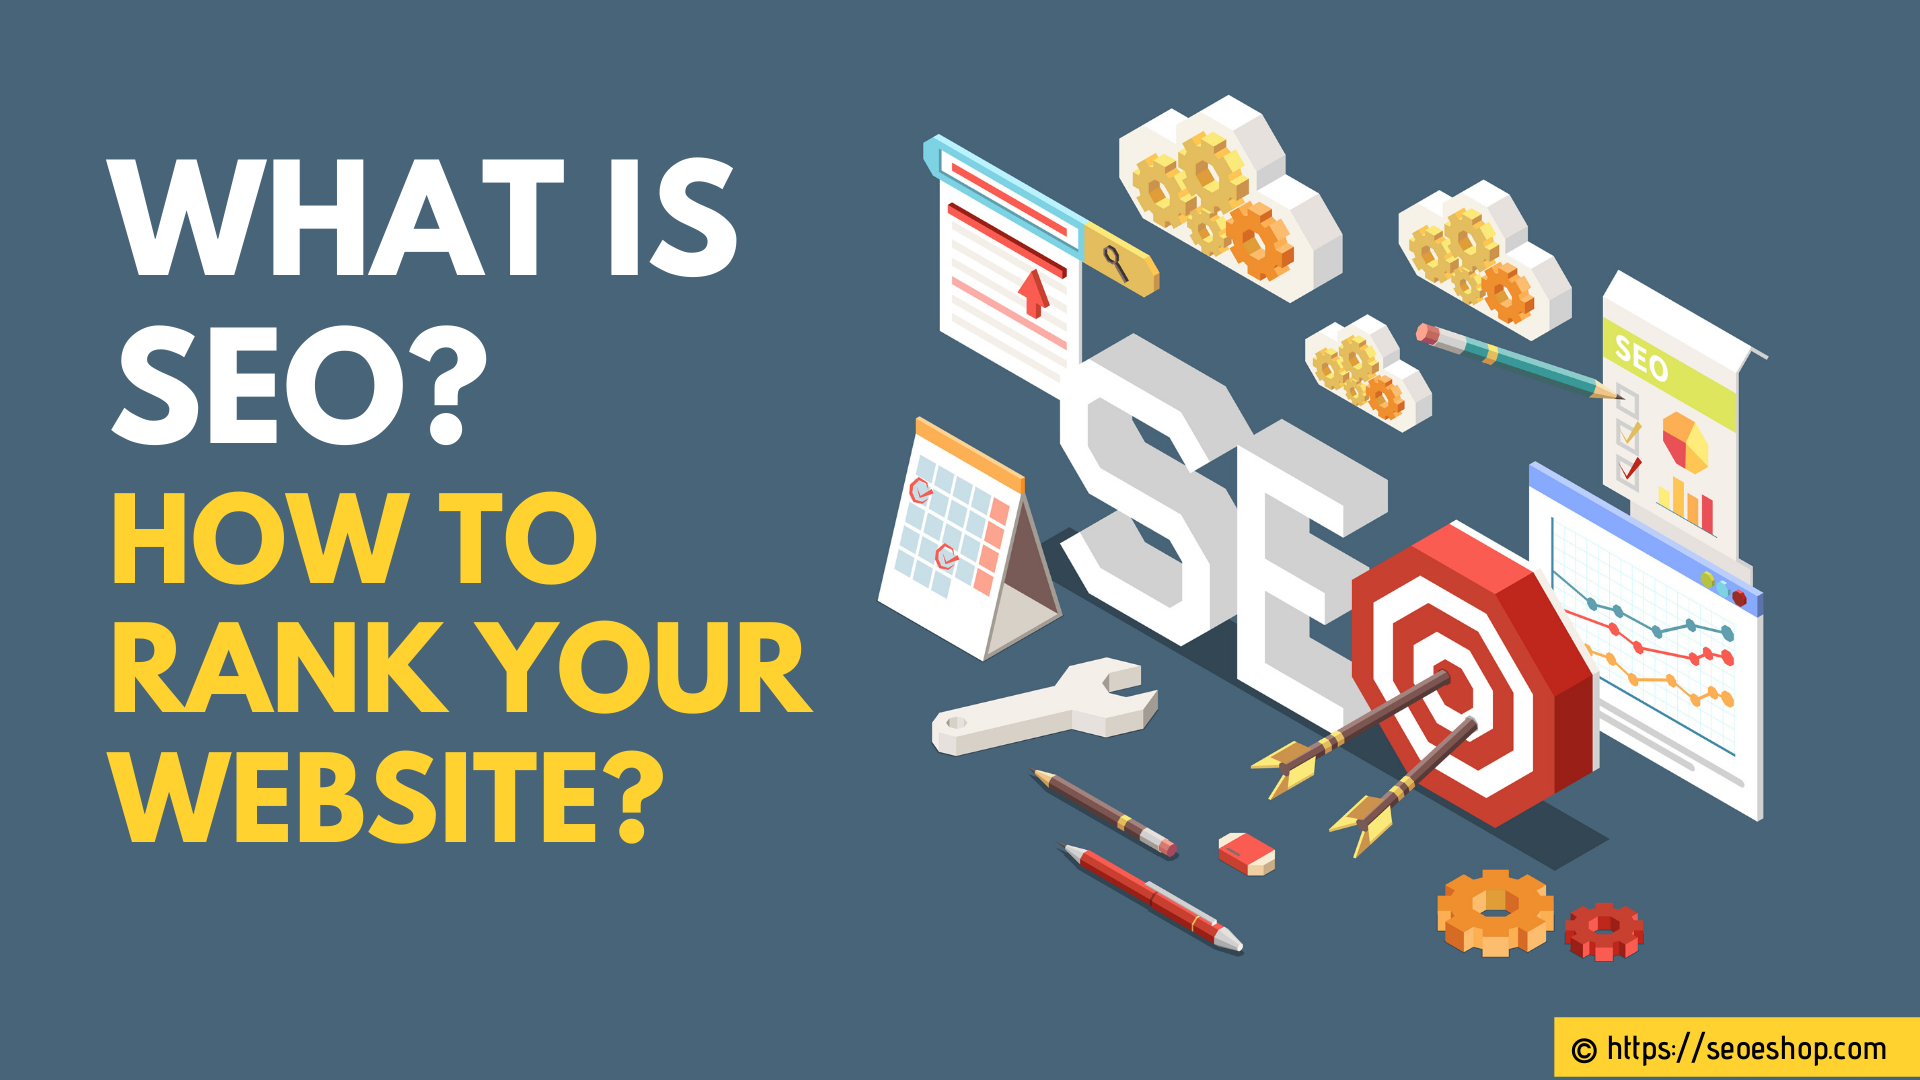 What is SEO? How To Rank Your Website?